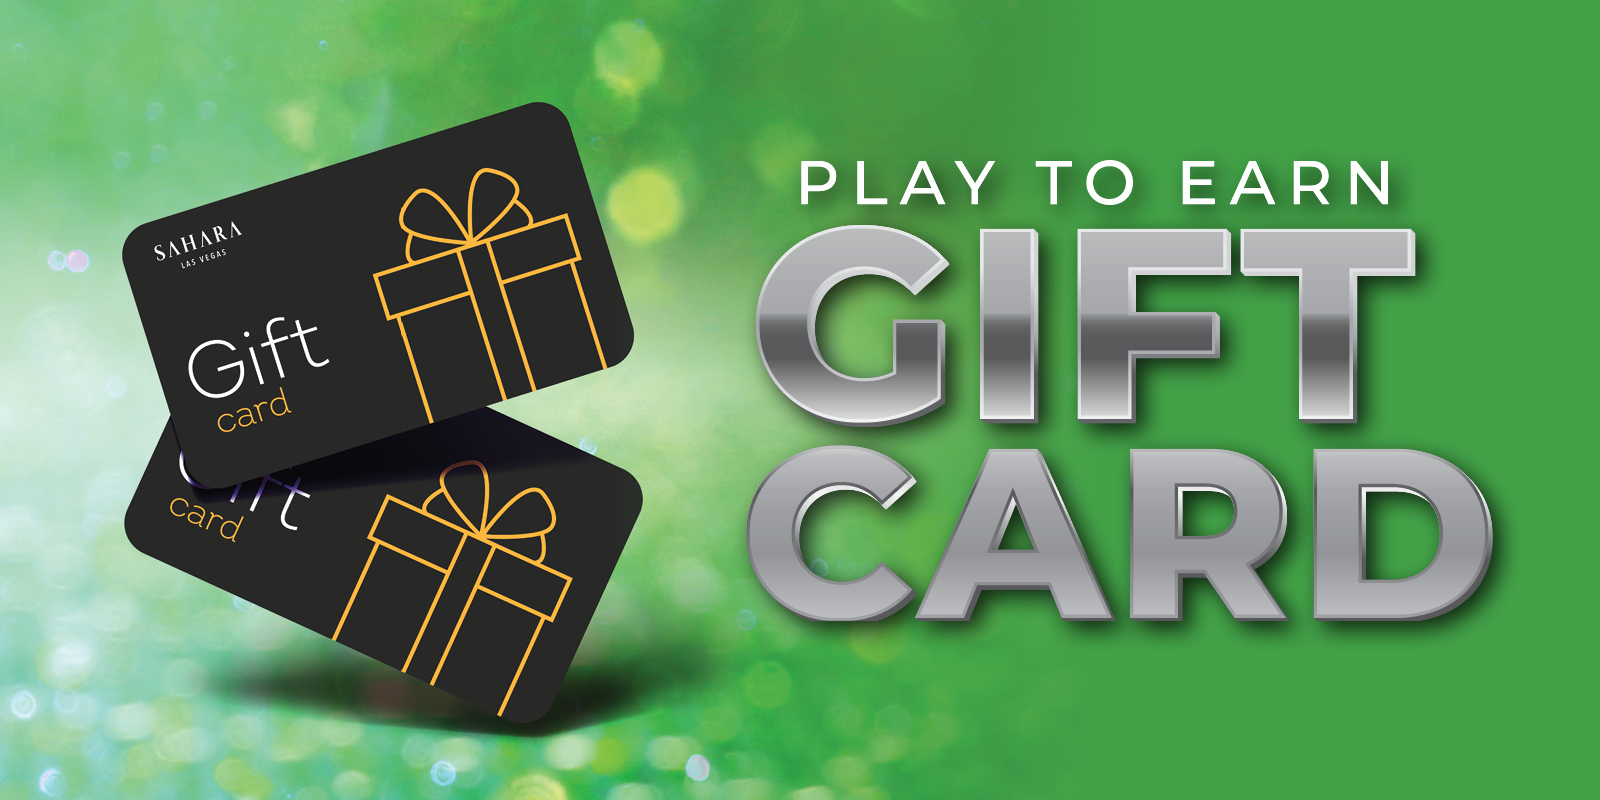 Play to Earn gift card creative showing the event name with gift cards